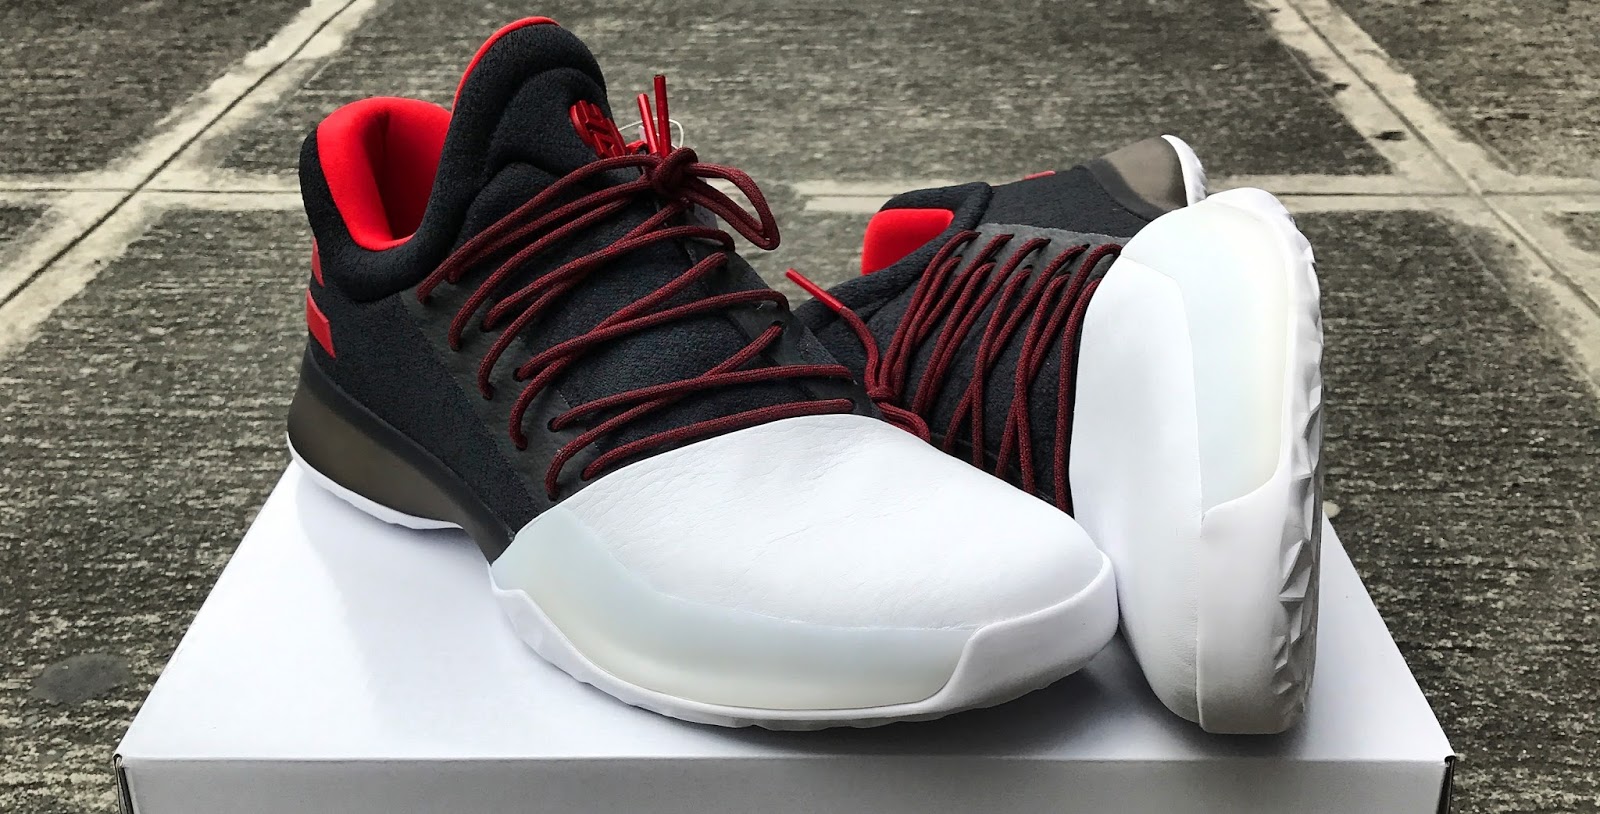 harden vol 1 performance review